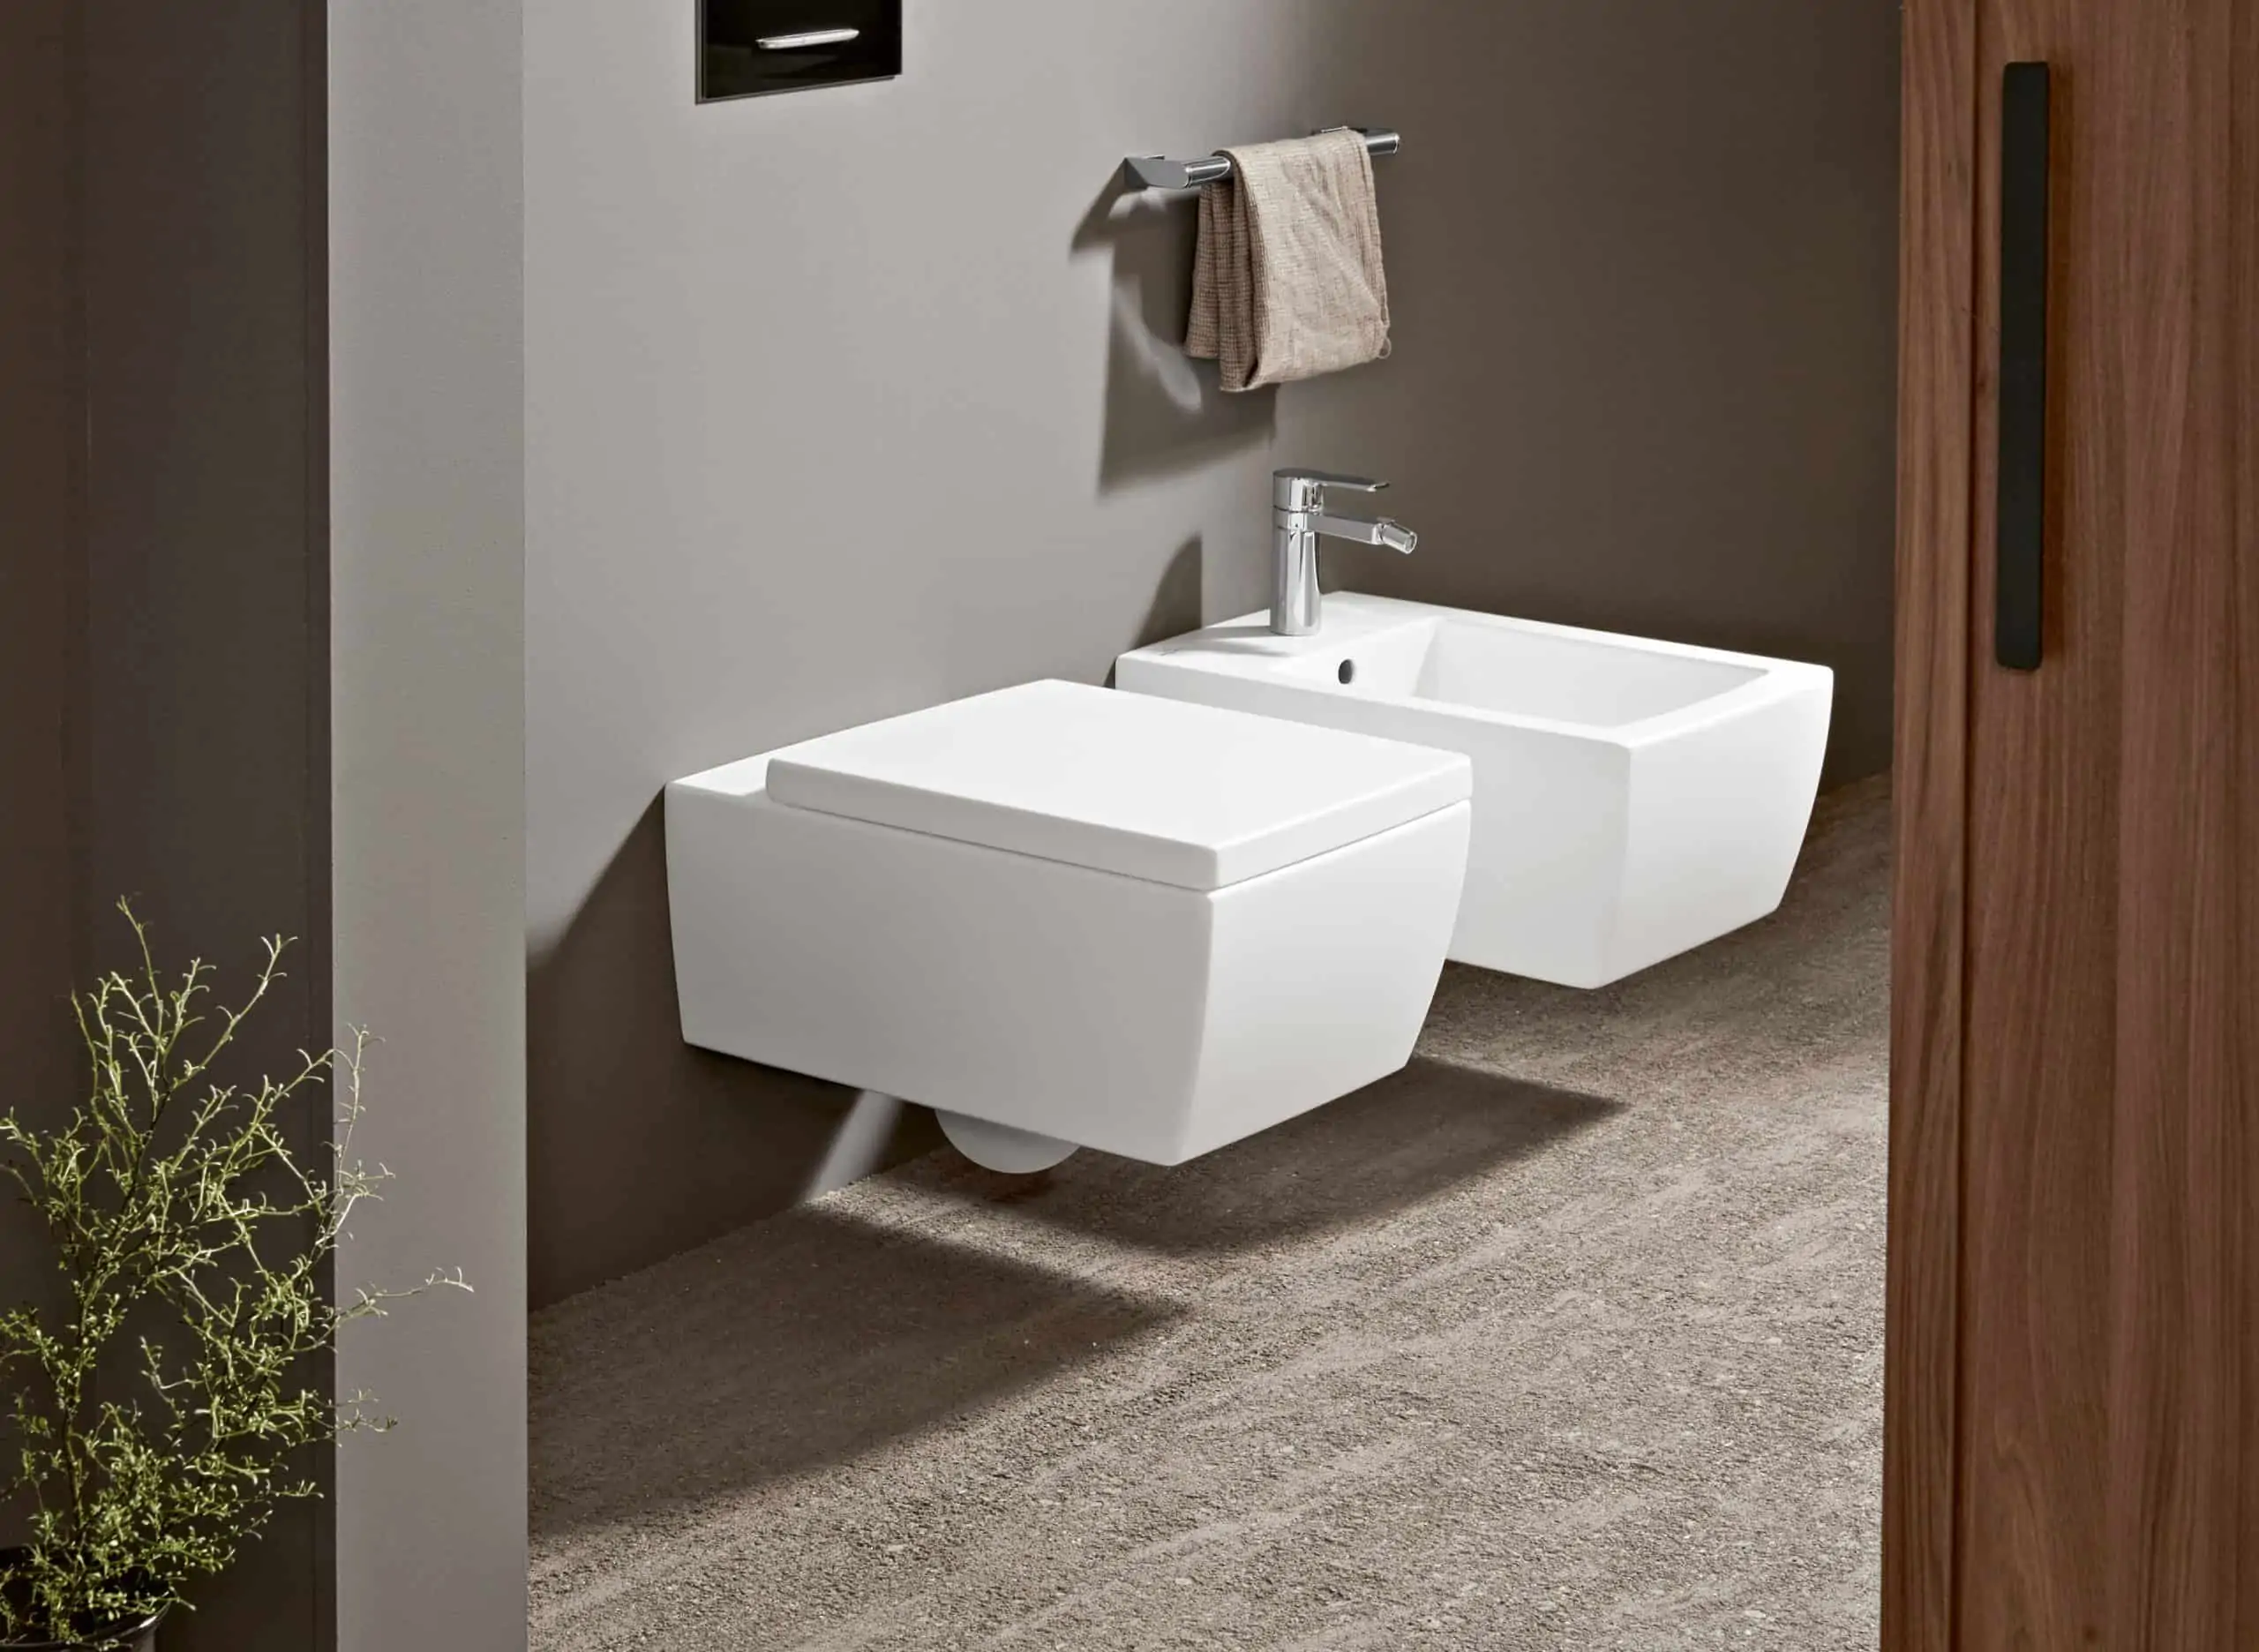 White wall-mounted toilet and bidet, villeroy & boch modern bathroom collection